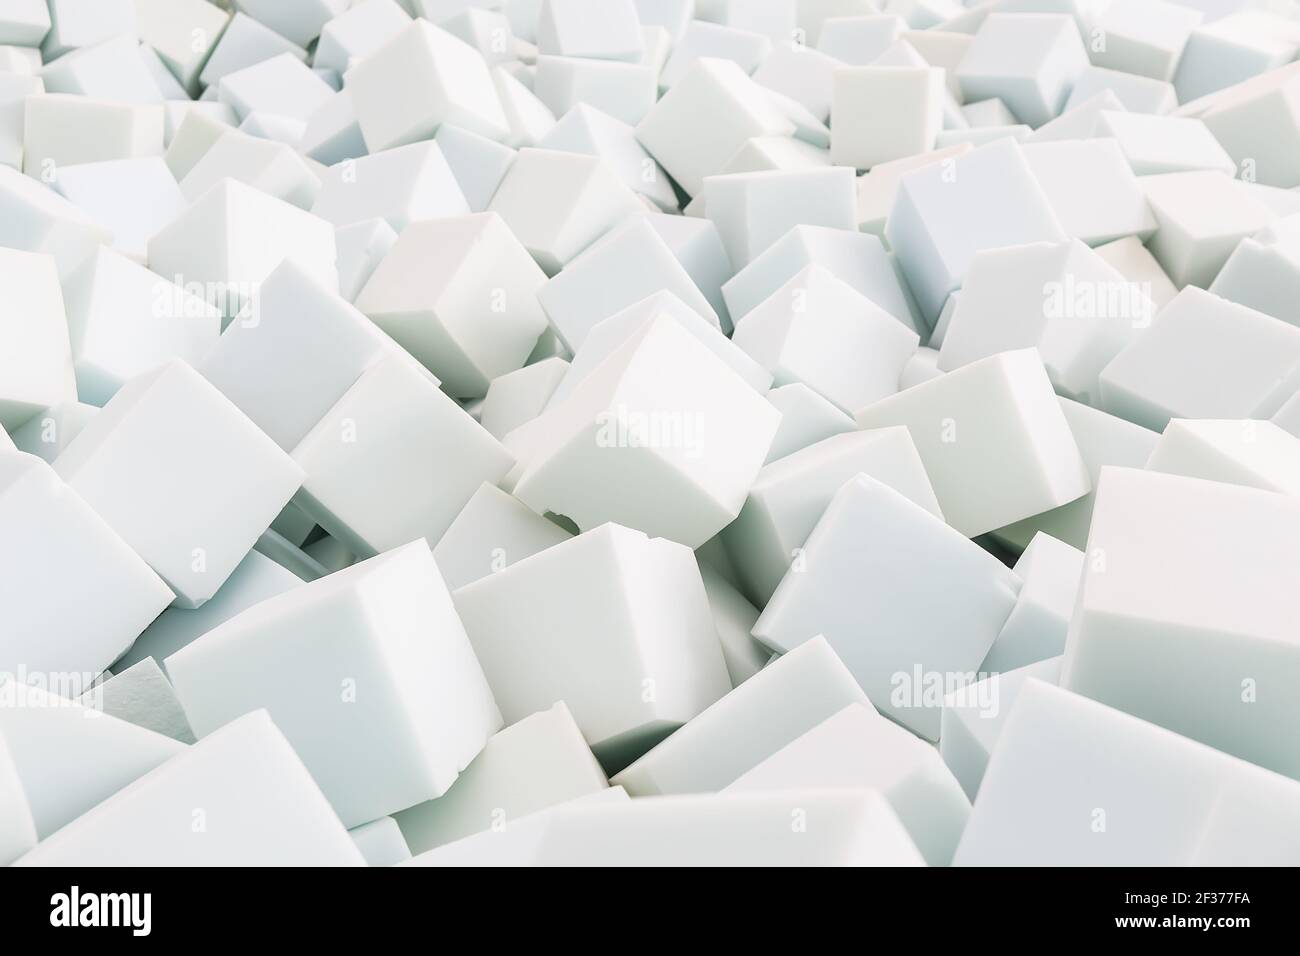 foam rubber white cubes in a gym Stock Photo